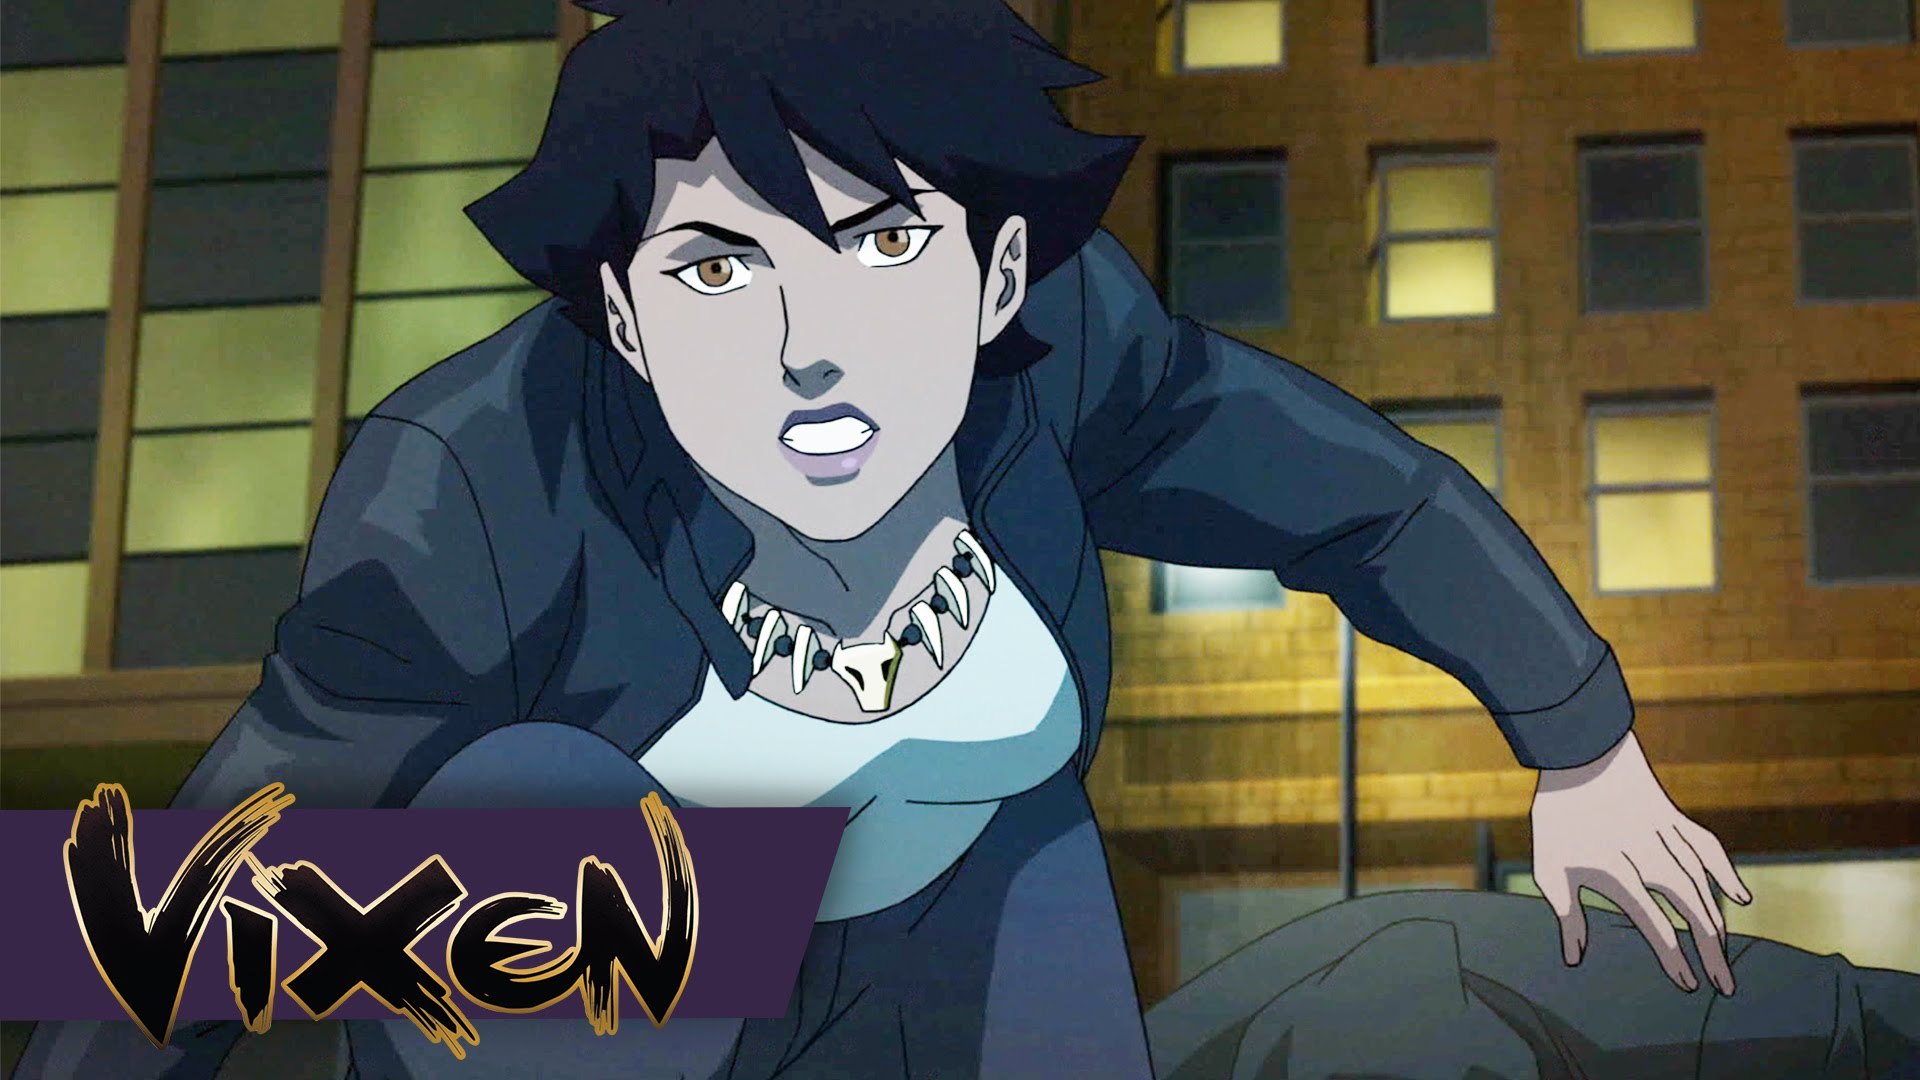 Exclusive: An Animated 'Vixen' Comes to Life On 'Arrow